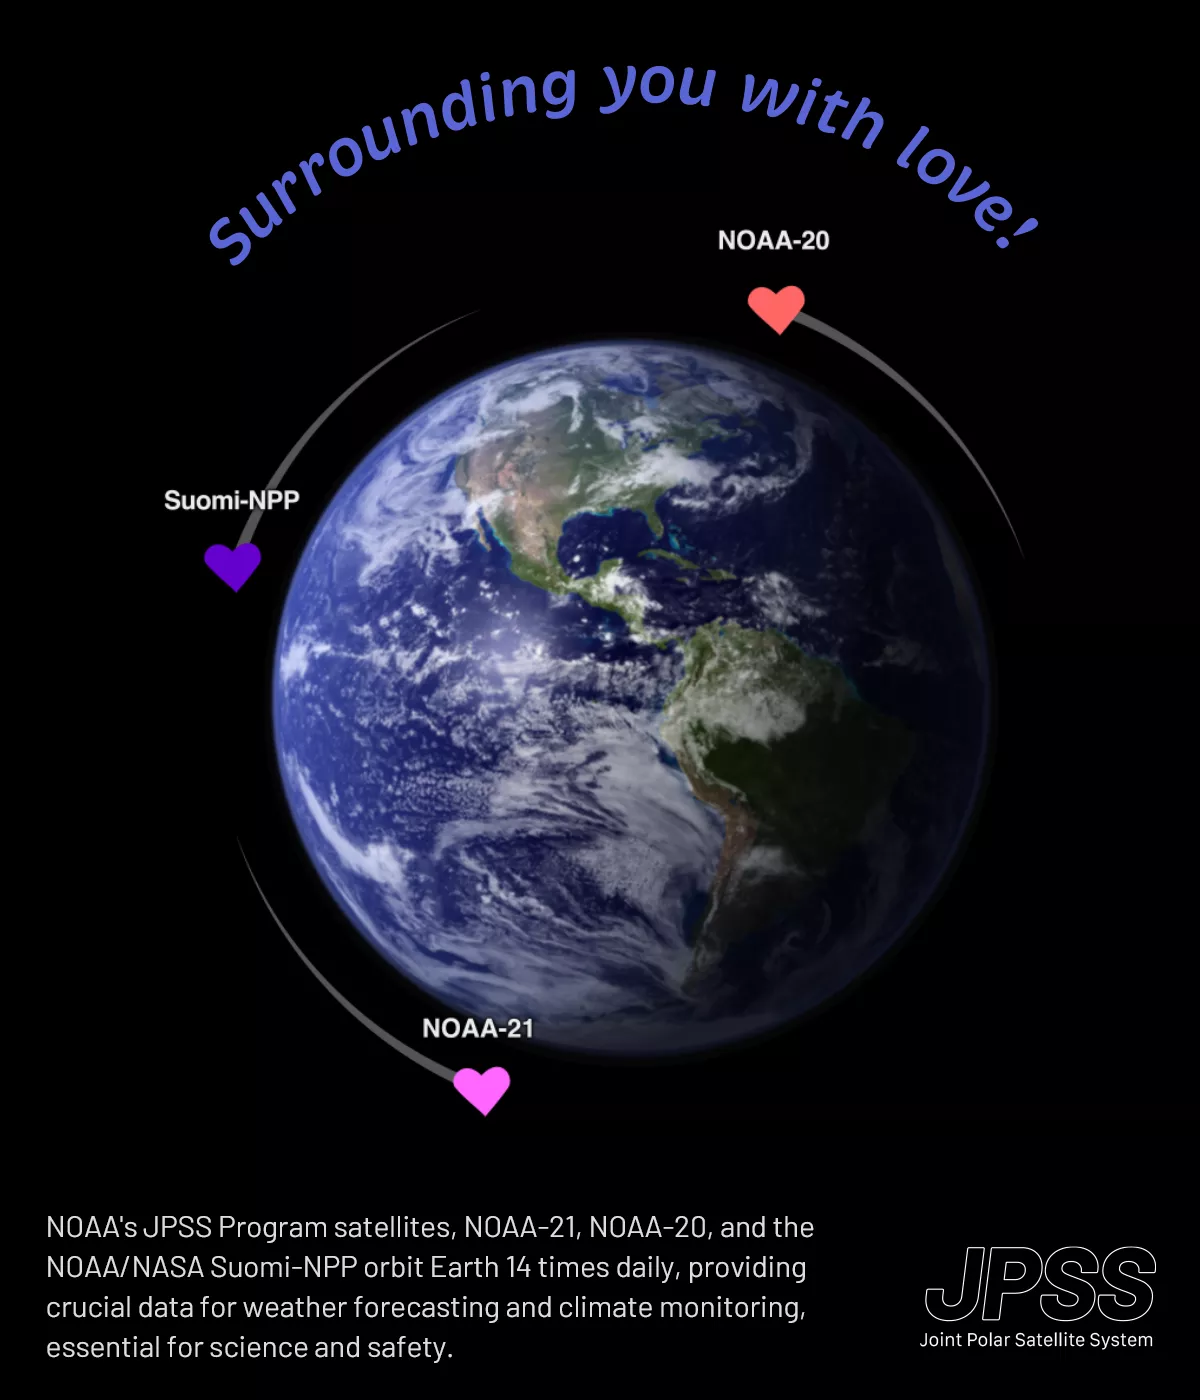 An image of Earth is seen set against a black background with the text “Surrounding you with love!” arched above it. Three satellites, NOAA-20, NOAA-21, and Suomi-NPP, are represented by small icons with heart symbols in red, pink, and purple respectively, orbiting around the planet. Below, a caption reads, “NOAA's JPSS Program satellites, NOAA-21, NOAA-20, and the NOAA/NASA Suomi-NPP orbit Earth 14 times daily, providing crucial data for weather forecasting and climate monitoring, essential for science and